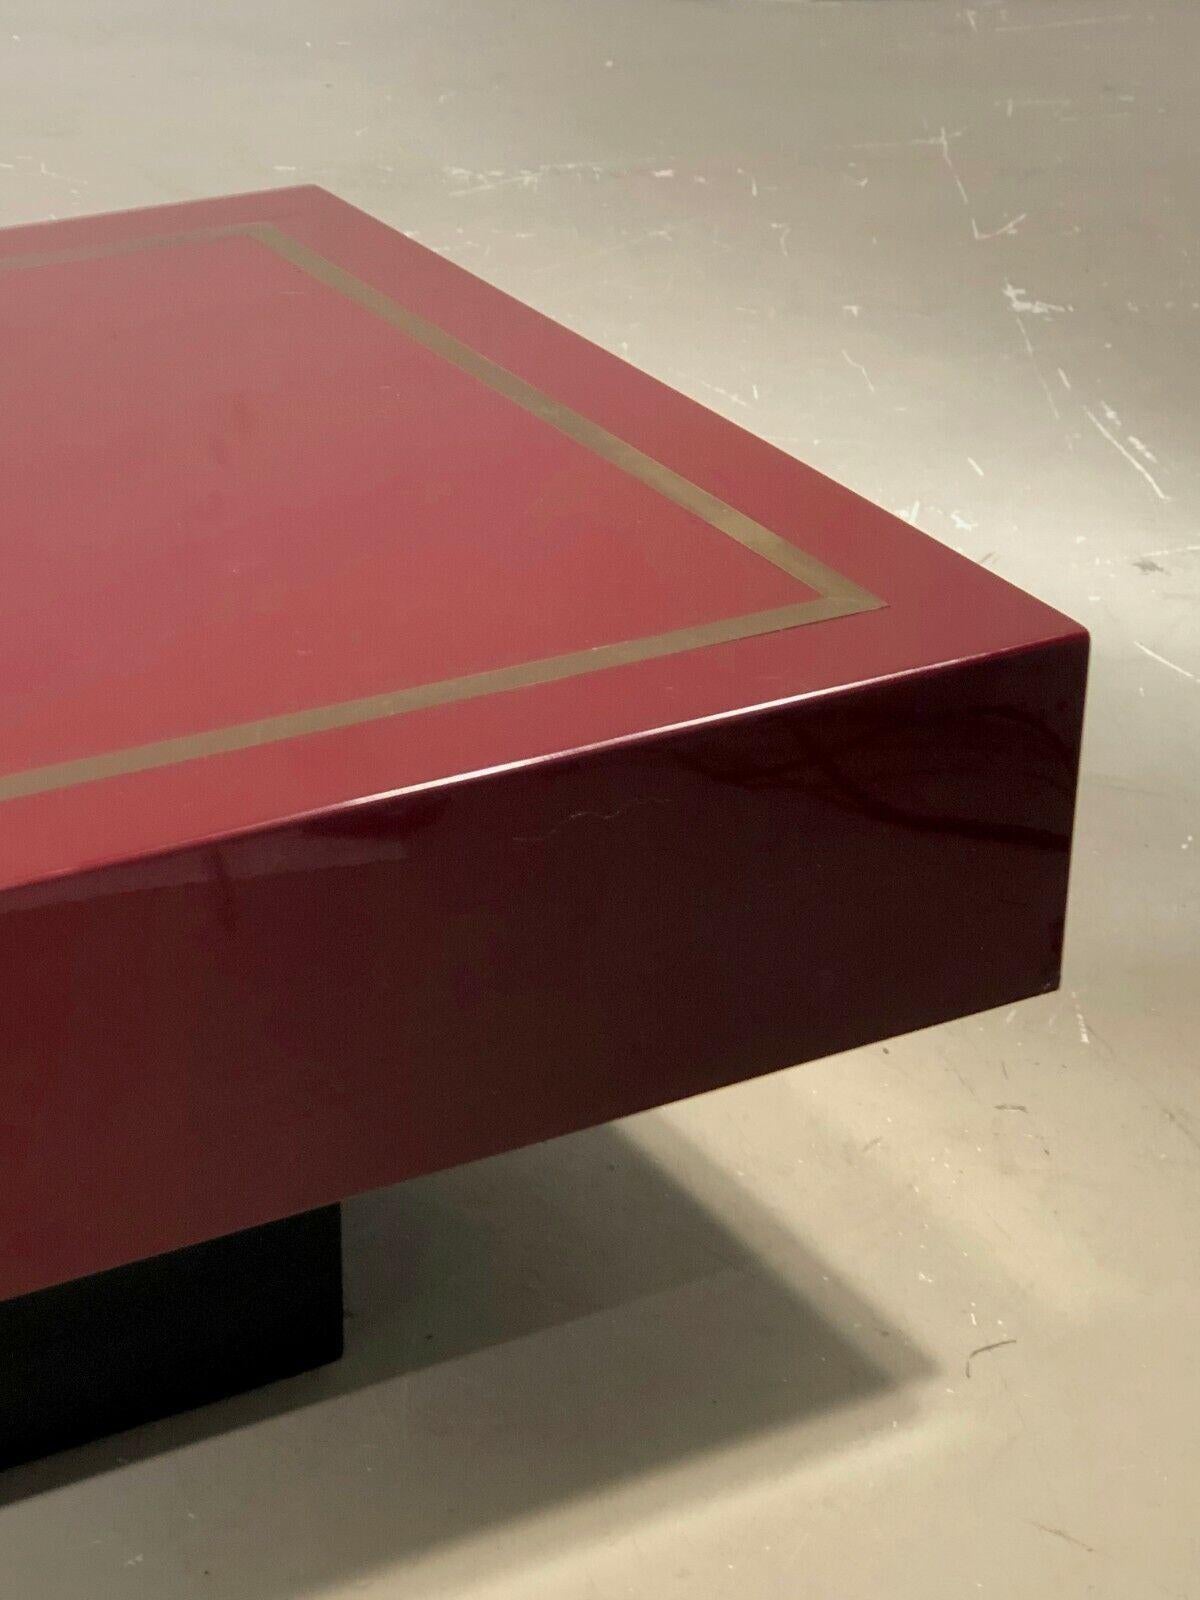 A NEOCLASSICAL SHABBY-CHIC Lacquer COFFEE TABLE by JEAN-CLAUDE MAHEY France 1970 For Sale 2